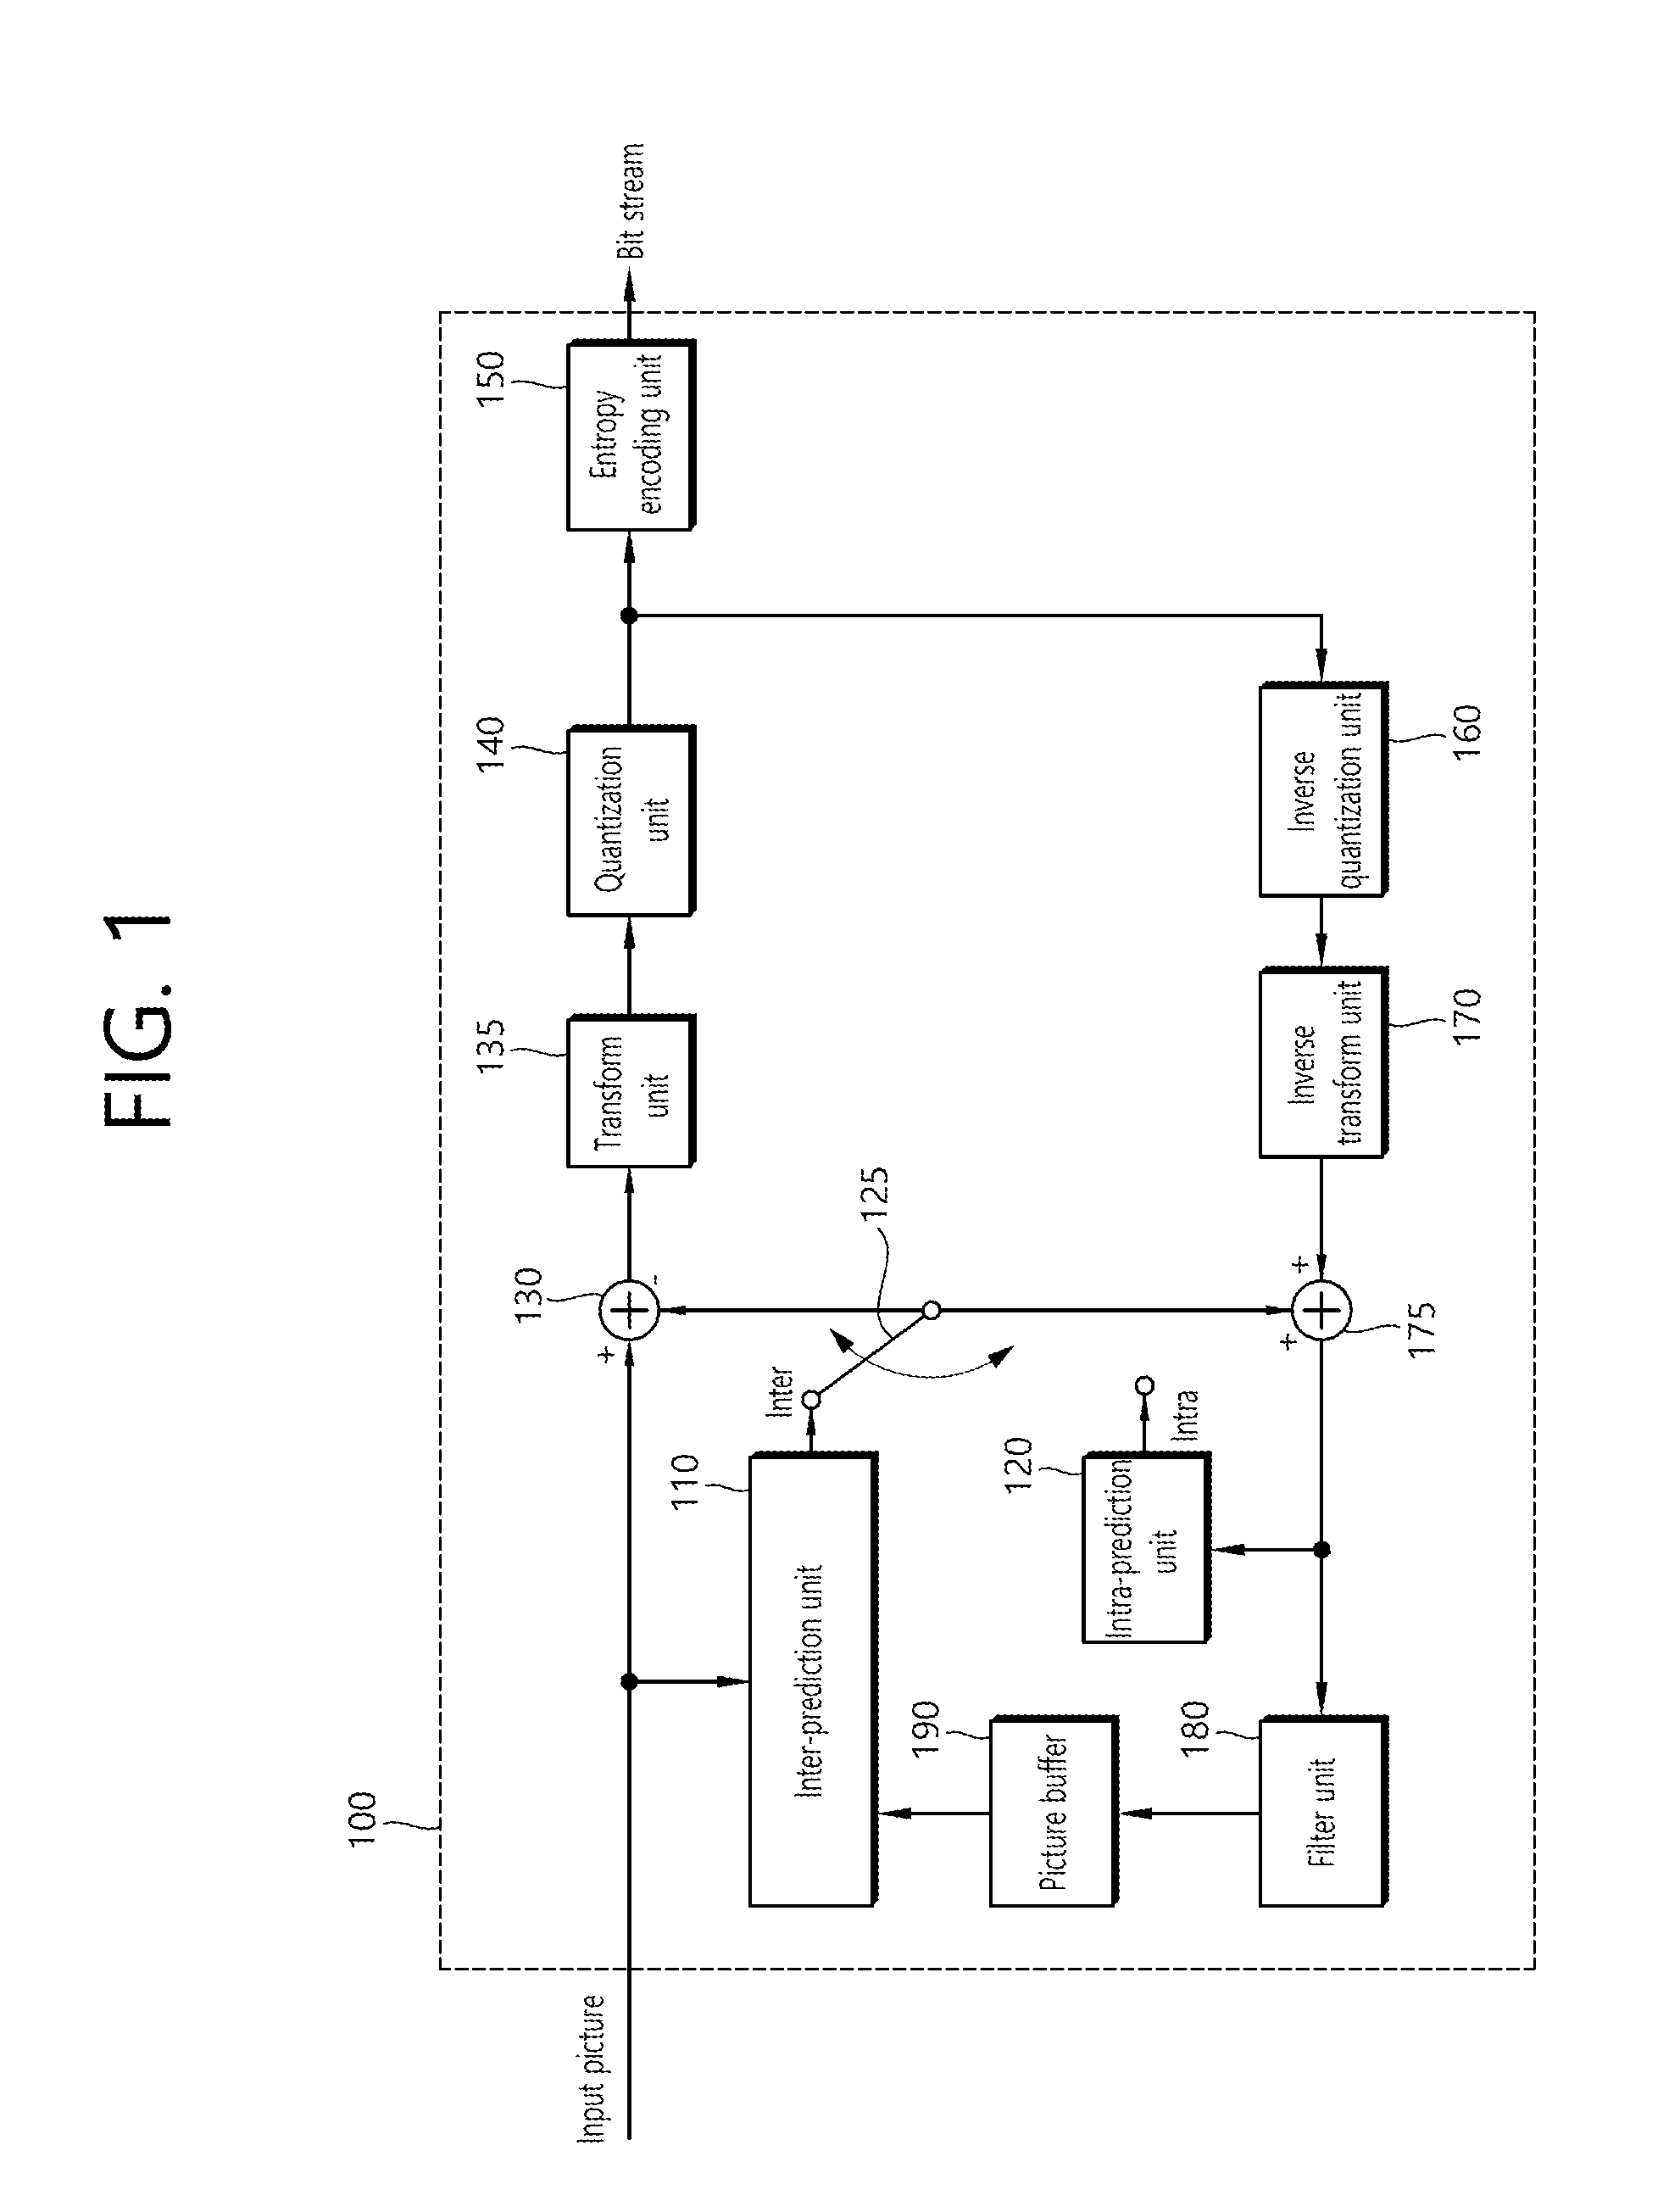 Method and apparatus for encoding/decoding image